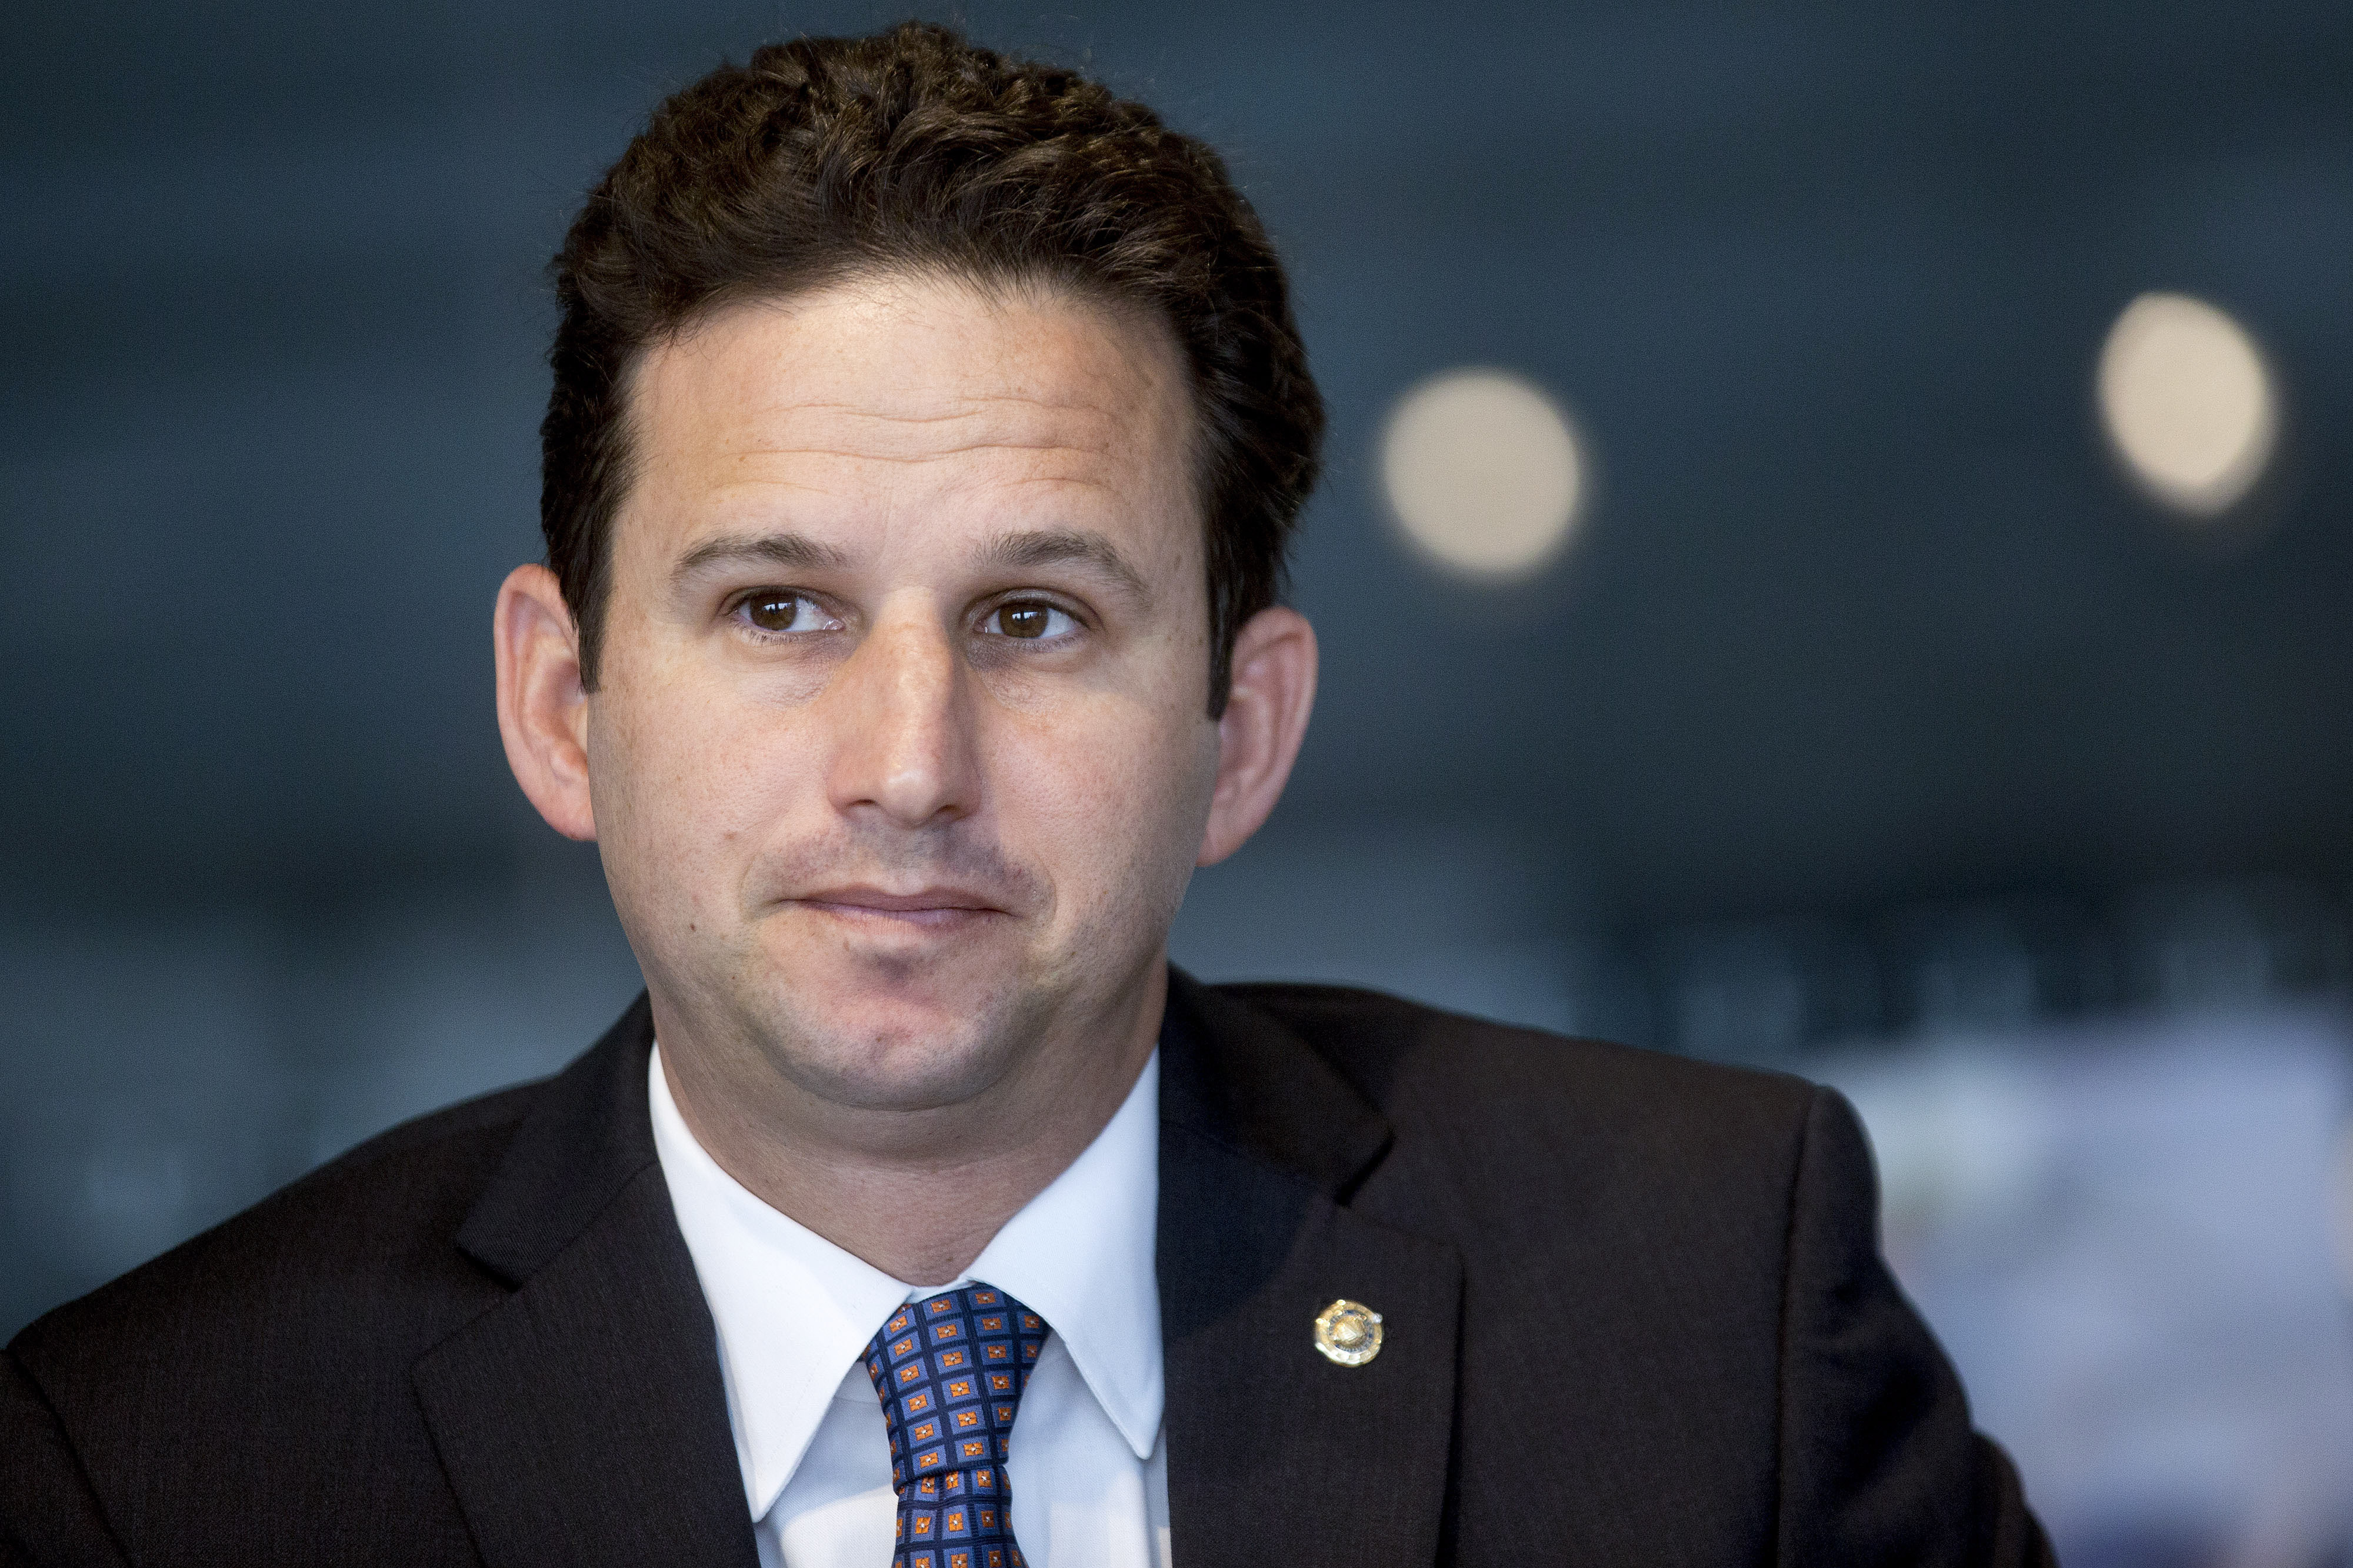 Senator Brian Schatz, a Democrat from Hawaii, listens to a question during an interview in Washington, D.C., U.S., on May 7, 2015. (Bloomberg via Getty Images)